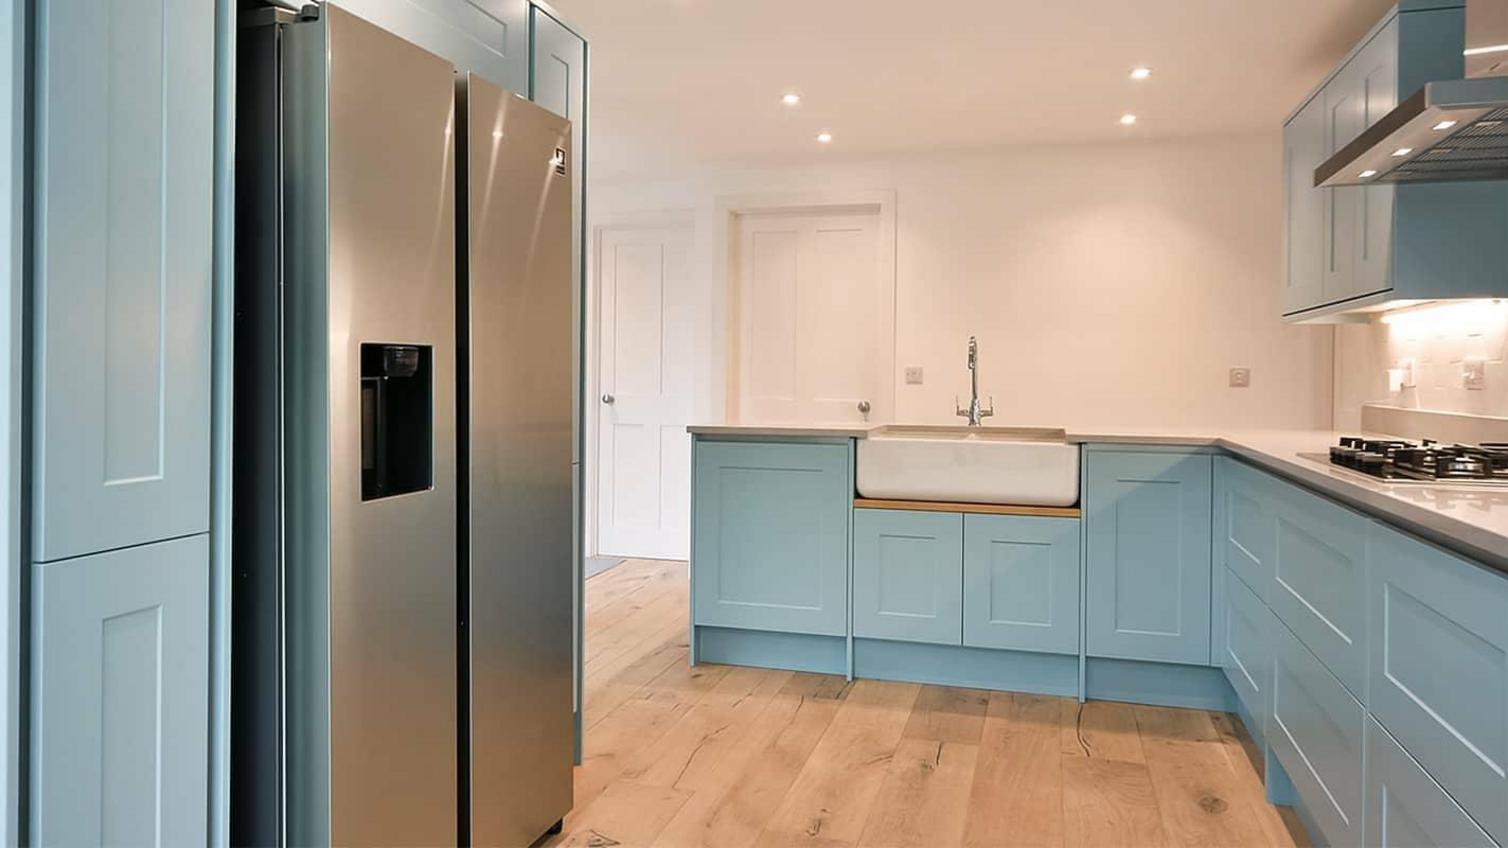 A blue kitchen idea using paintable shaker doors. Features a white, double bowl ceramic sink, wooden worktops, and floors.